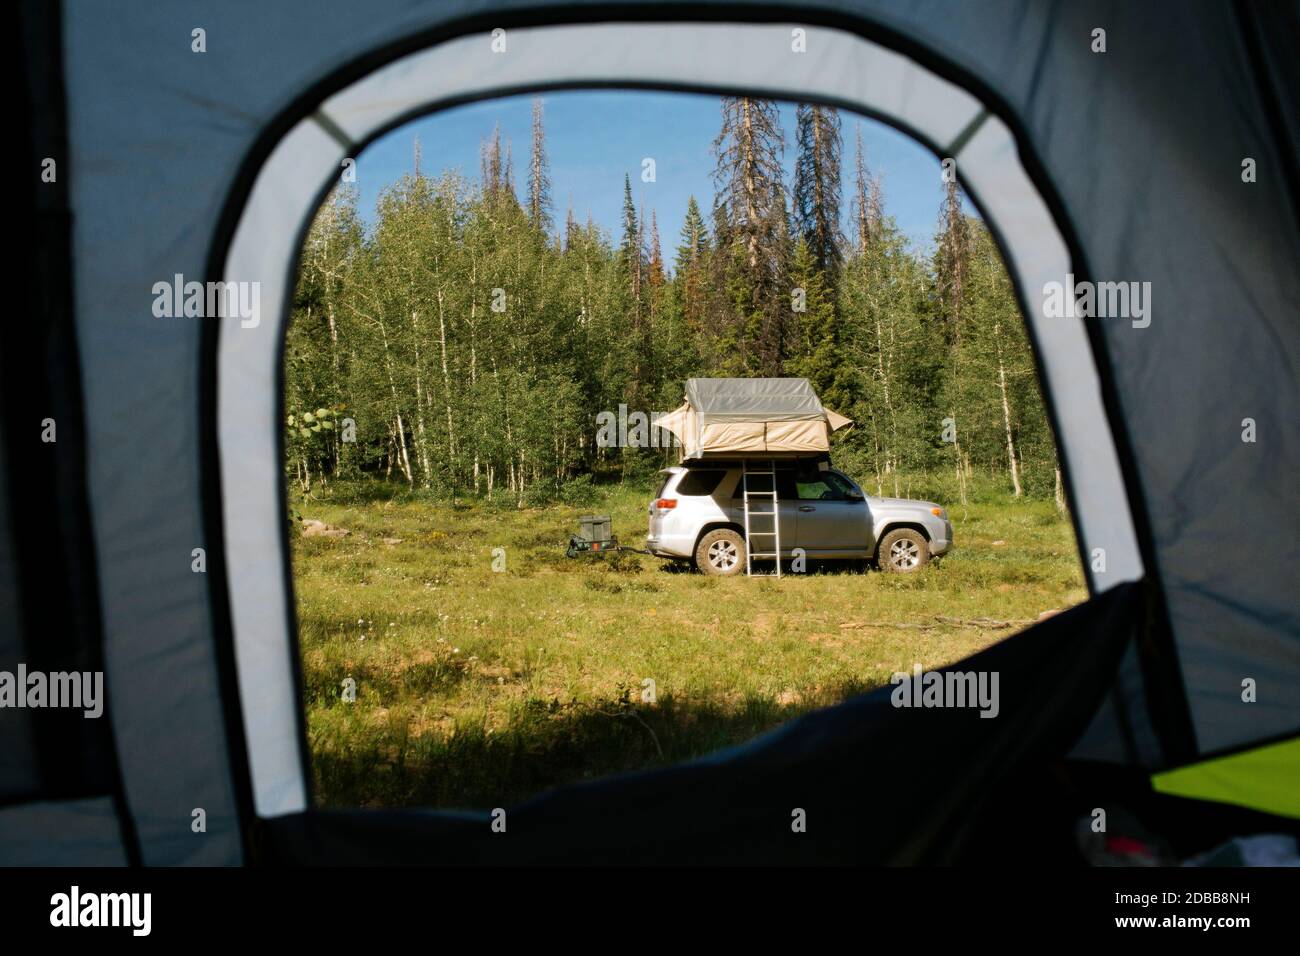 USA, Utah, Uinta National Park, View from tent on car parked in forest Stock Photo